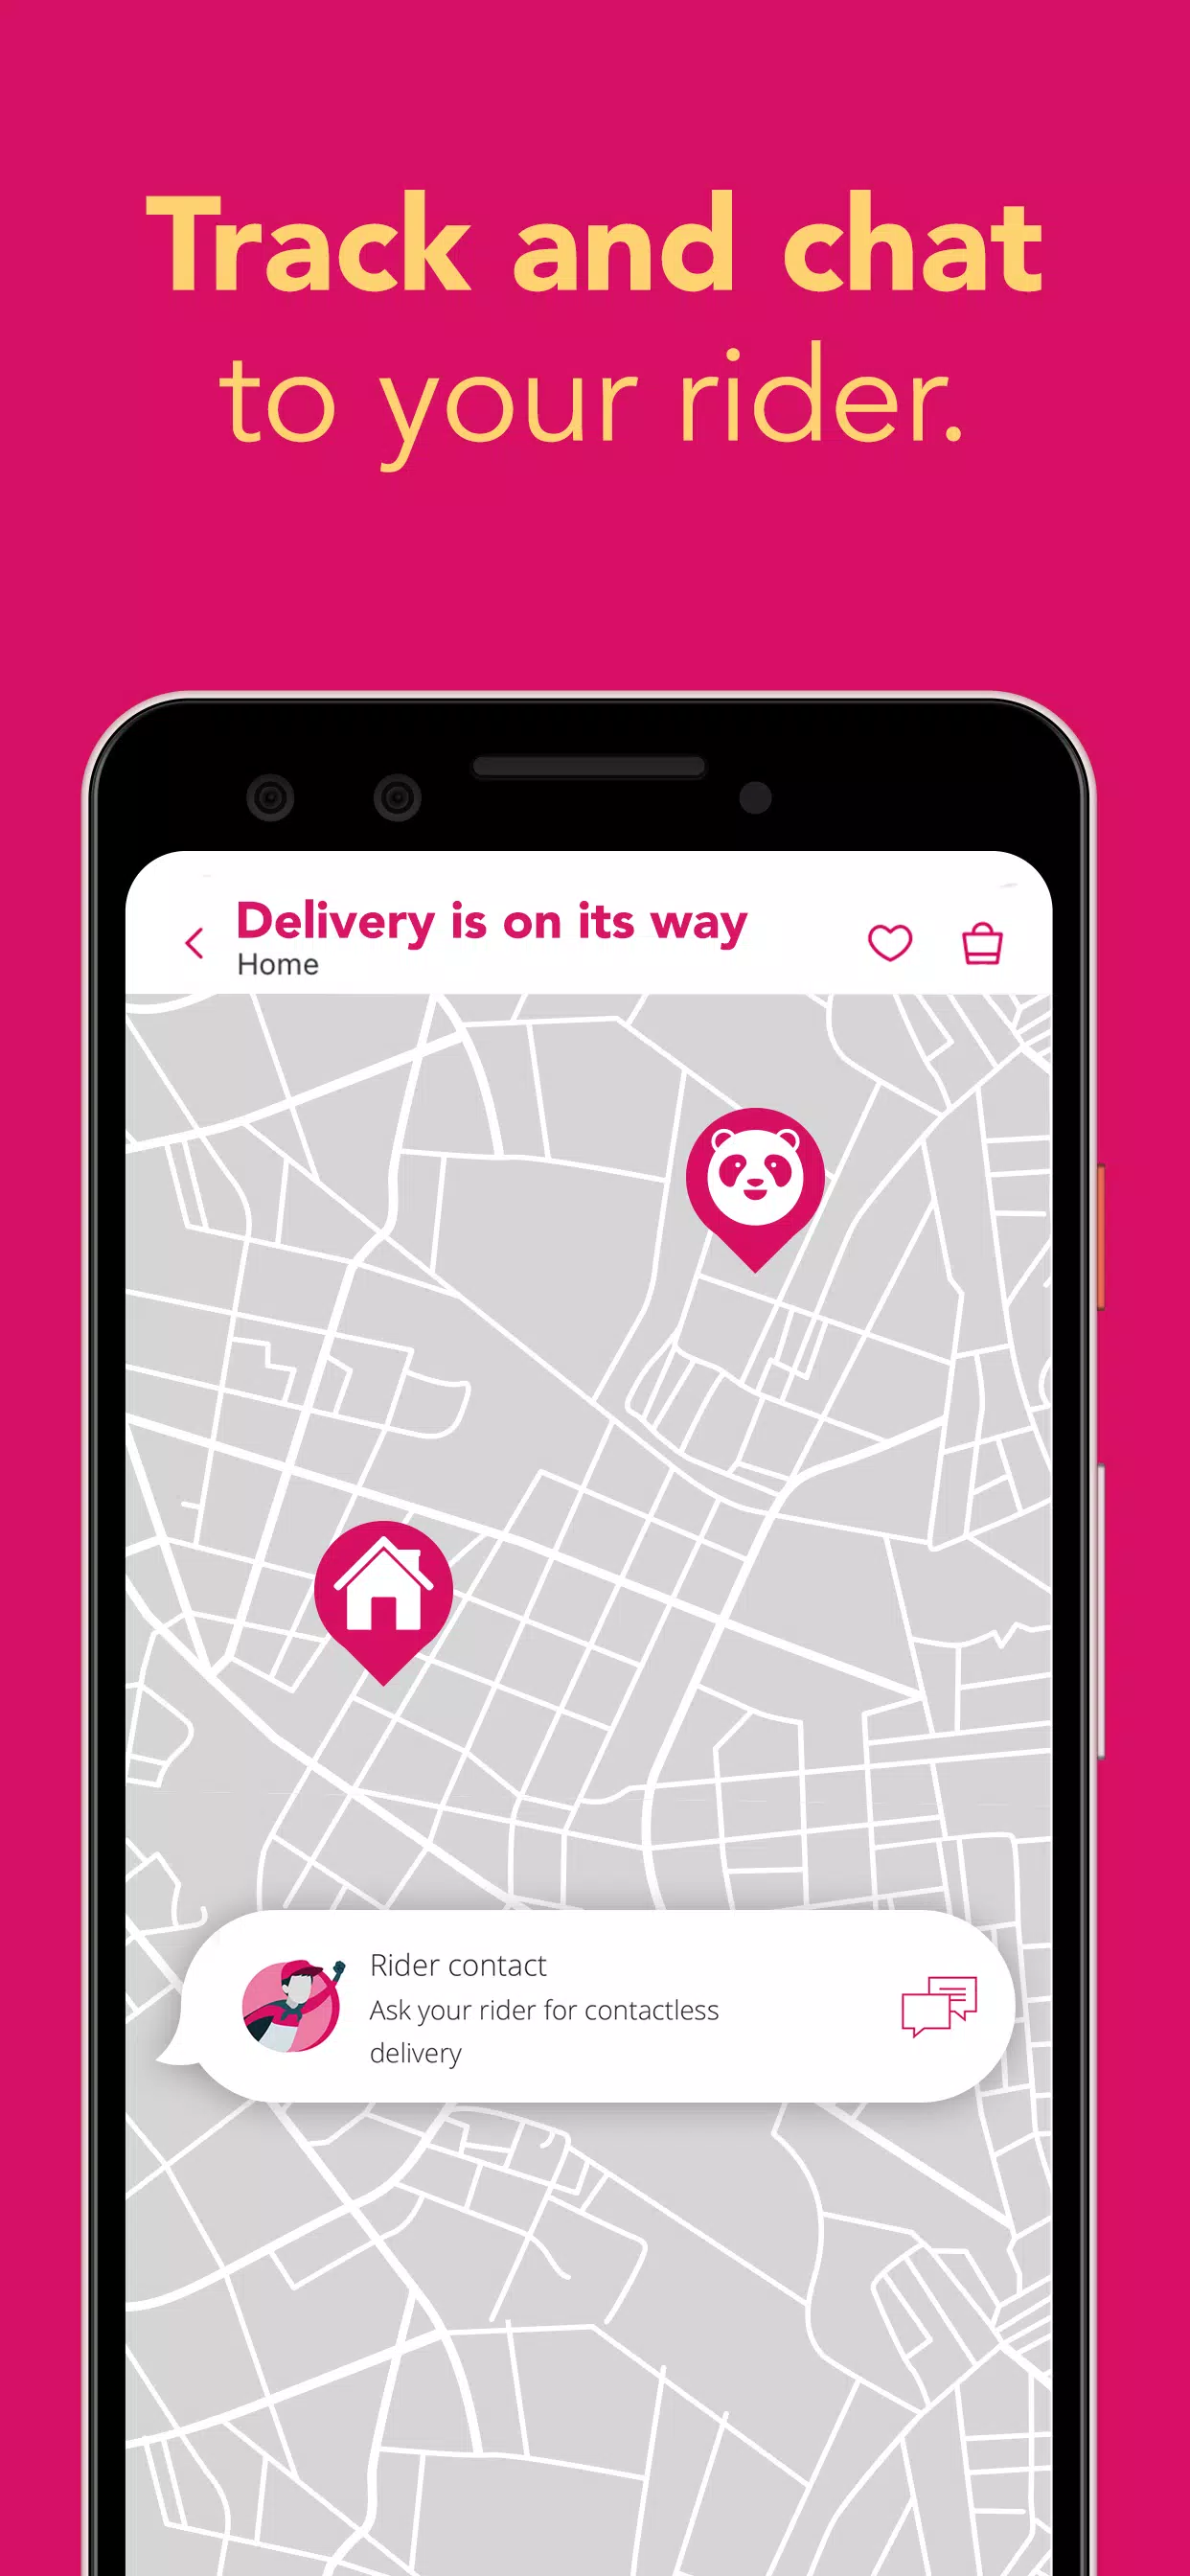 How to track food panda order